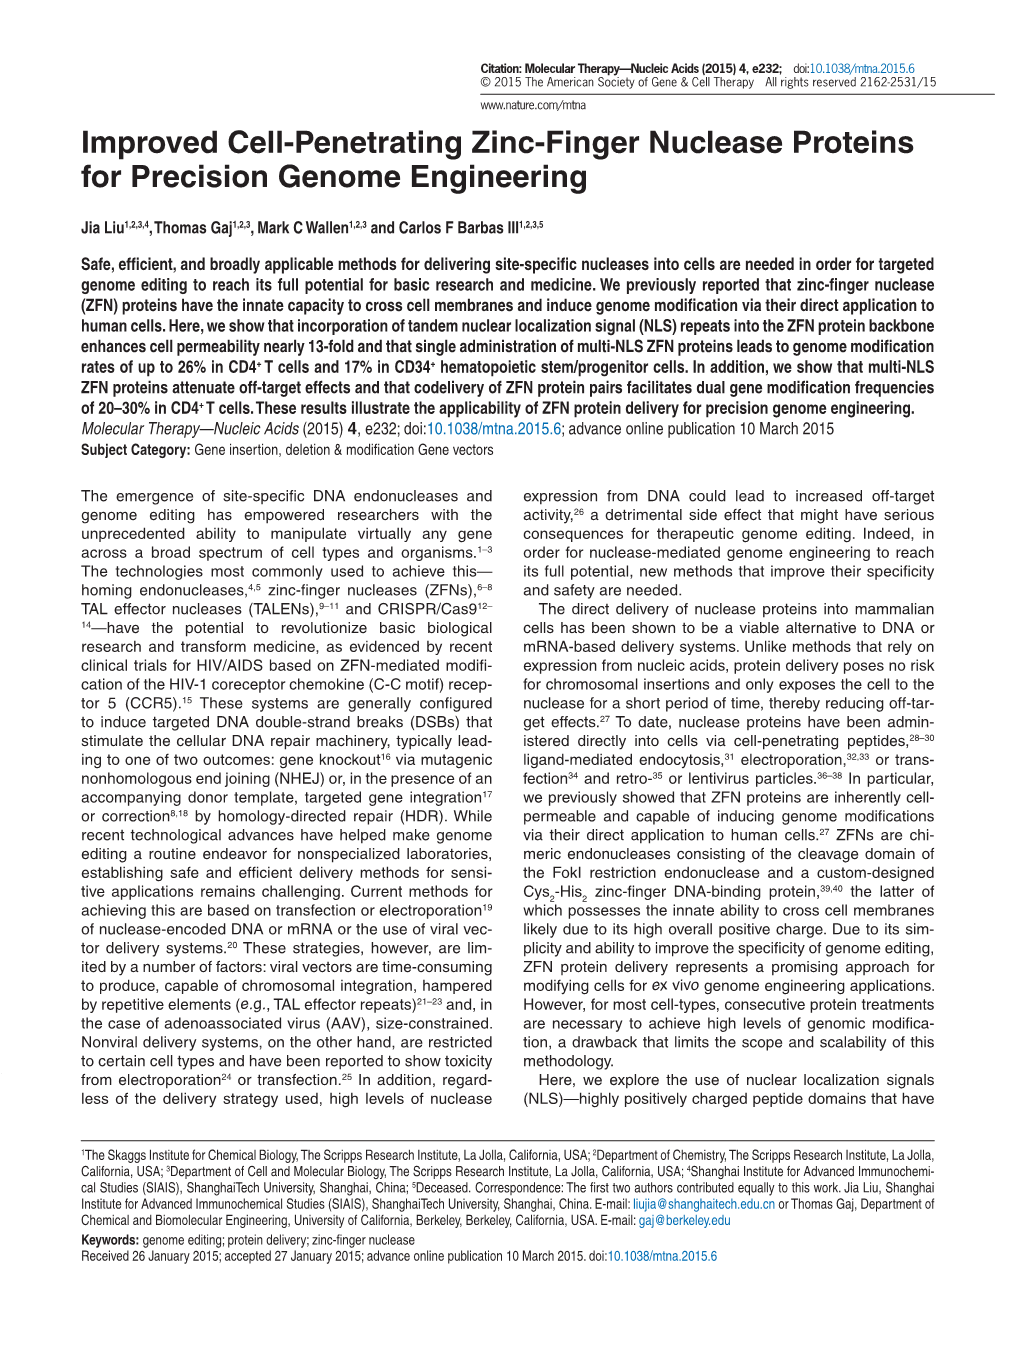 Improved Cell-Penetrating Zinc-Finger Nuclease Proteins for Precision Genome Engineering